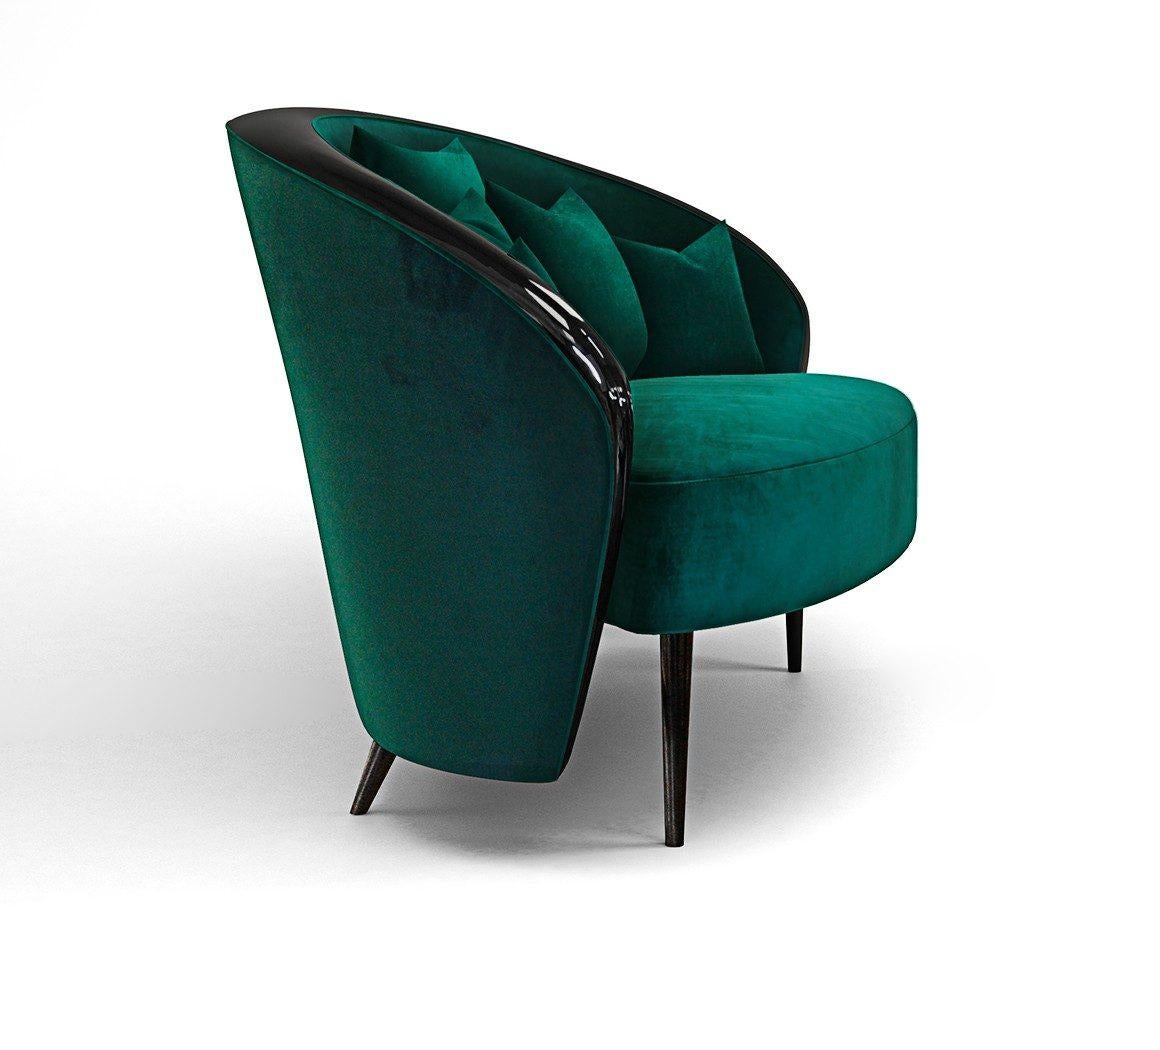 European Contemporary Armchair in Glossy Black Lacquer For Sale